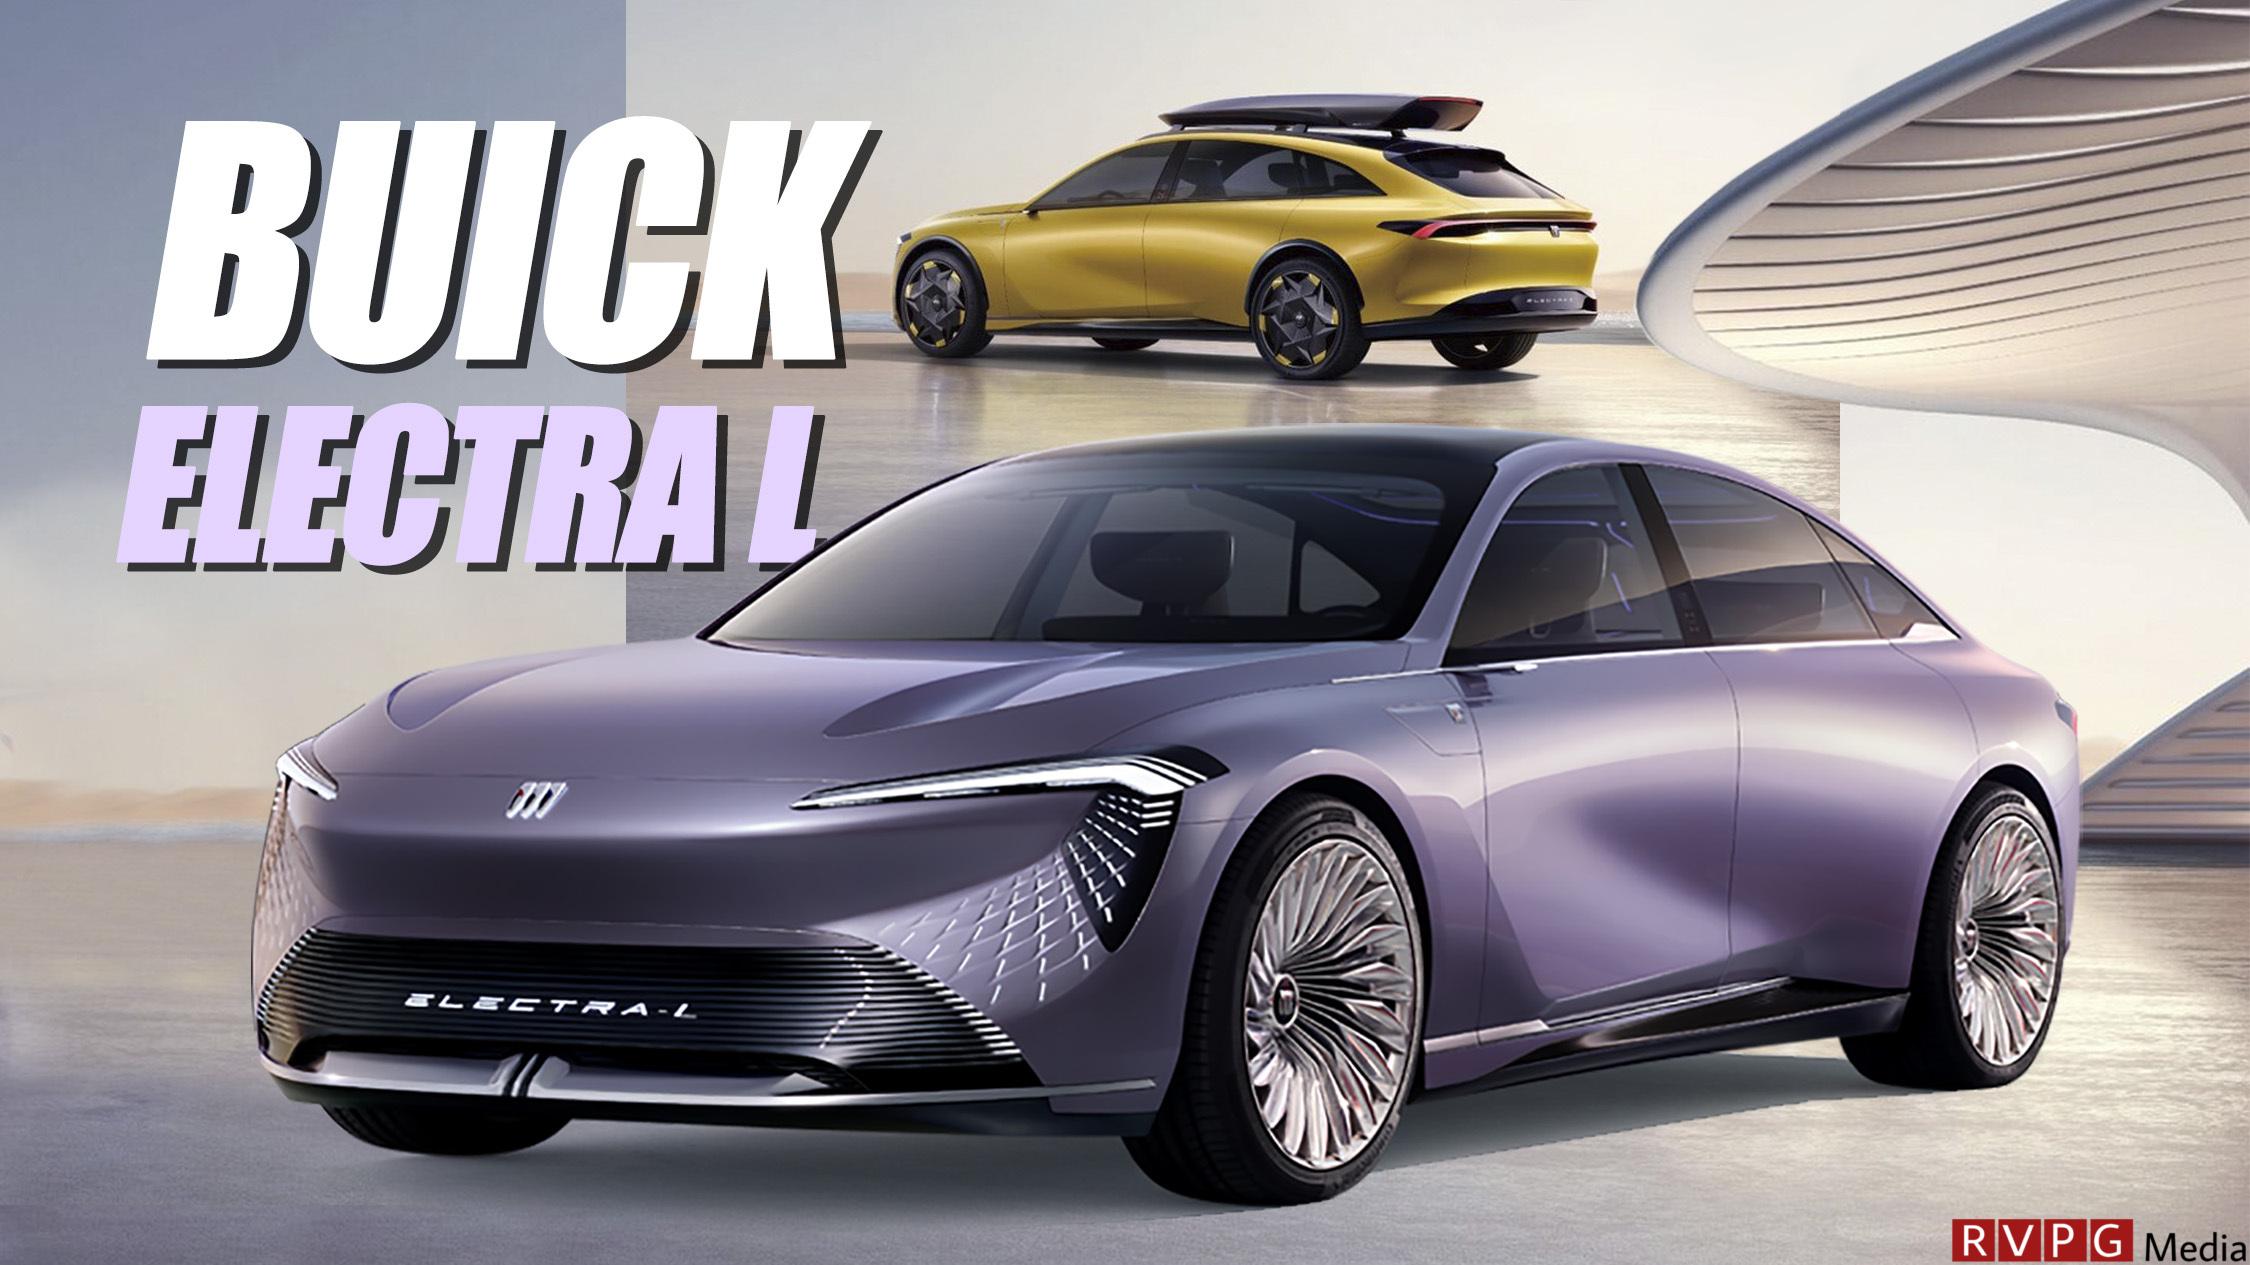 Buick Reveals Pair Of Electra Concepts With A Glovebox Display And Strikingly Good Looks